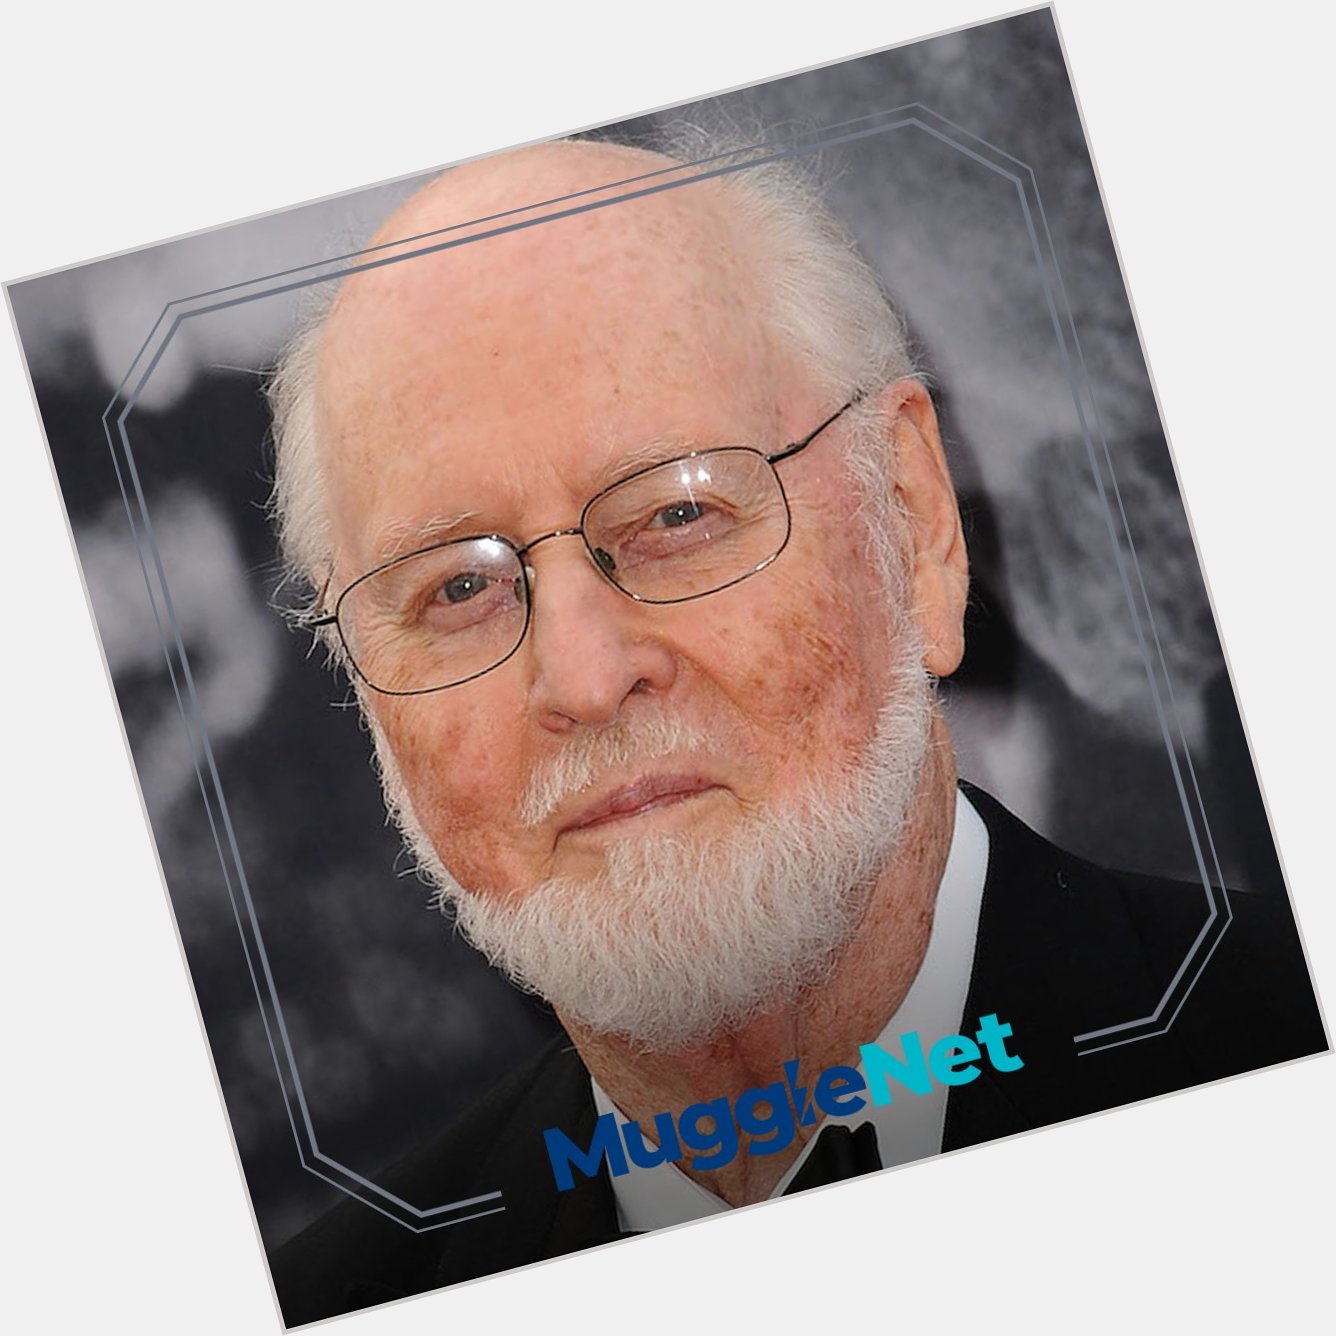 Happy birthday to John Williams, who was the composer for the first three films. 